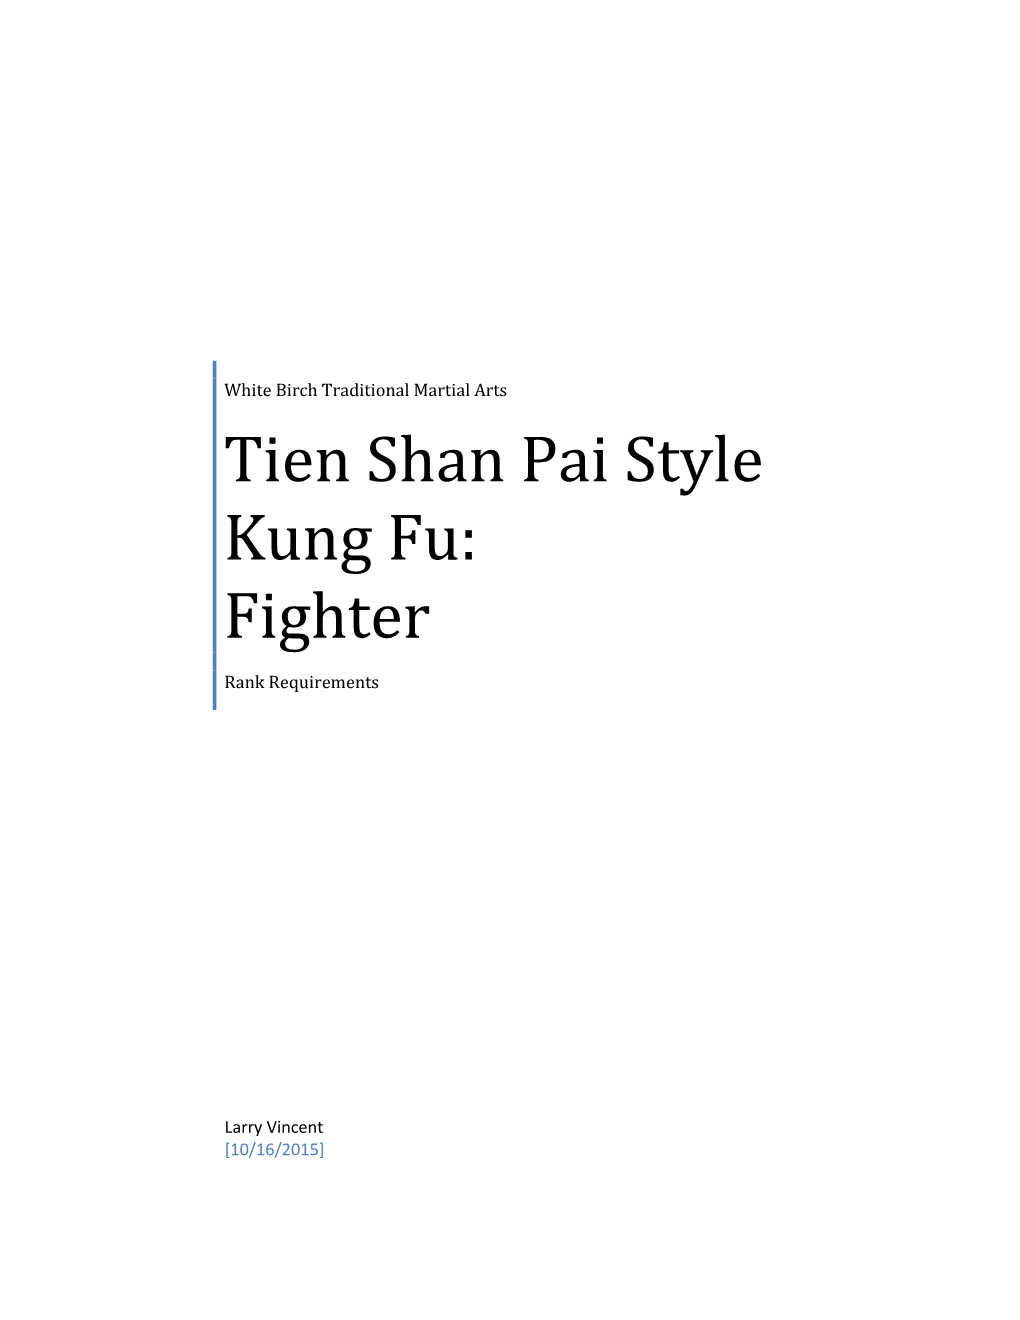 Tien Shan Pai Style Kung Fu: Fighter